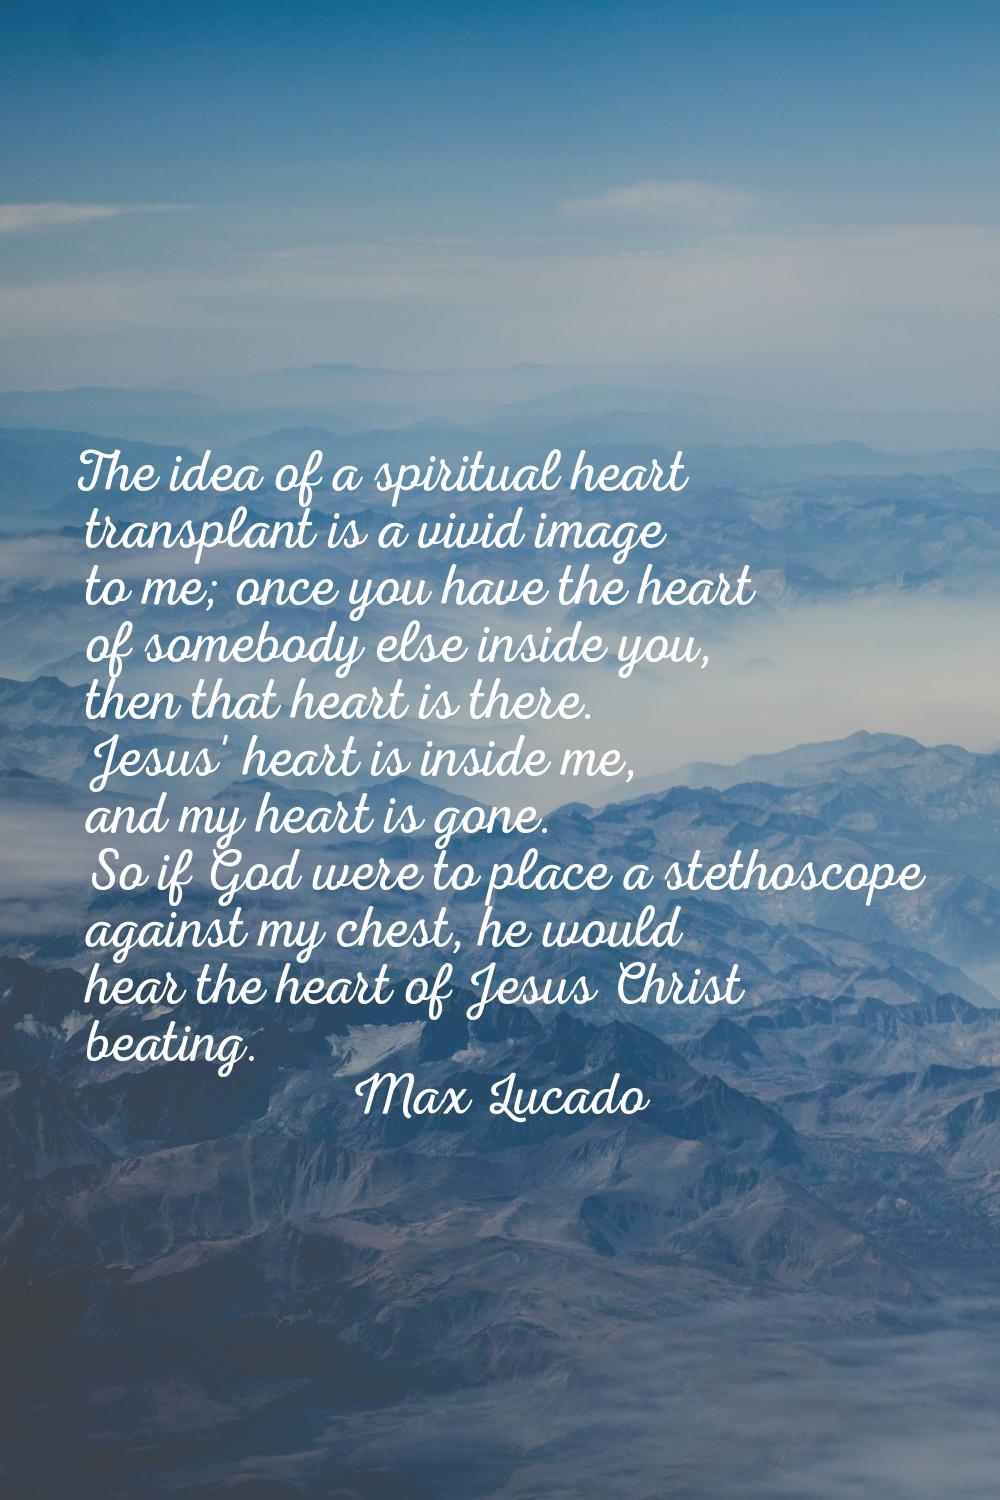 The idea of a spiritual heart transplant is a vivid image to me; once you have the heart of somebod